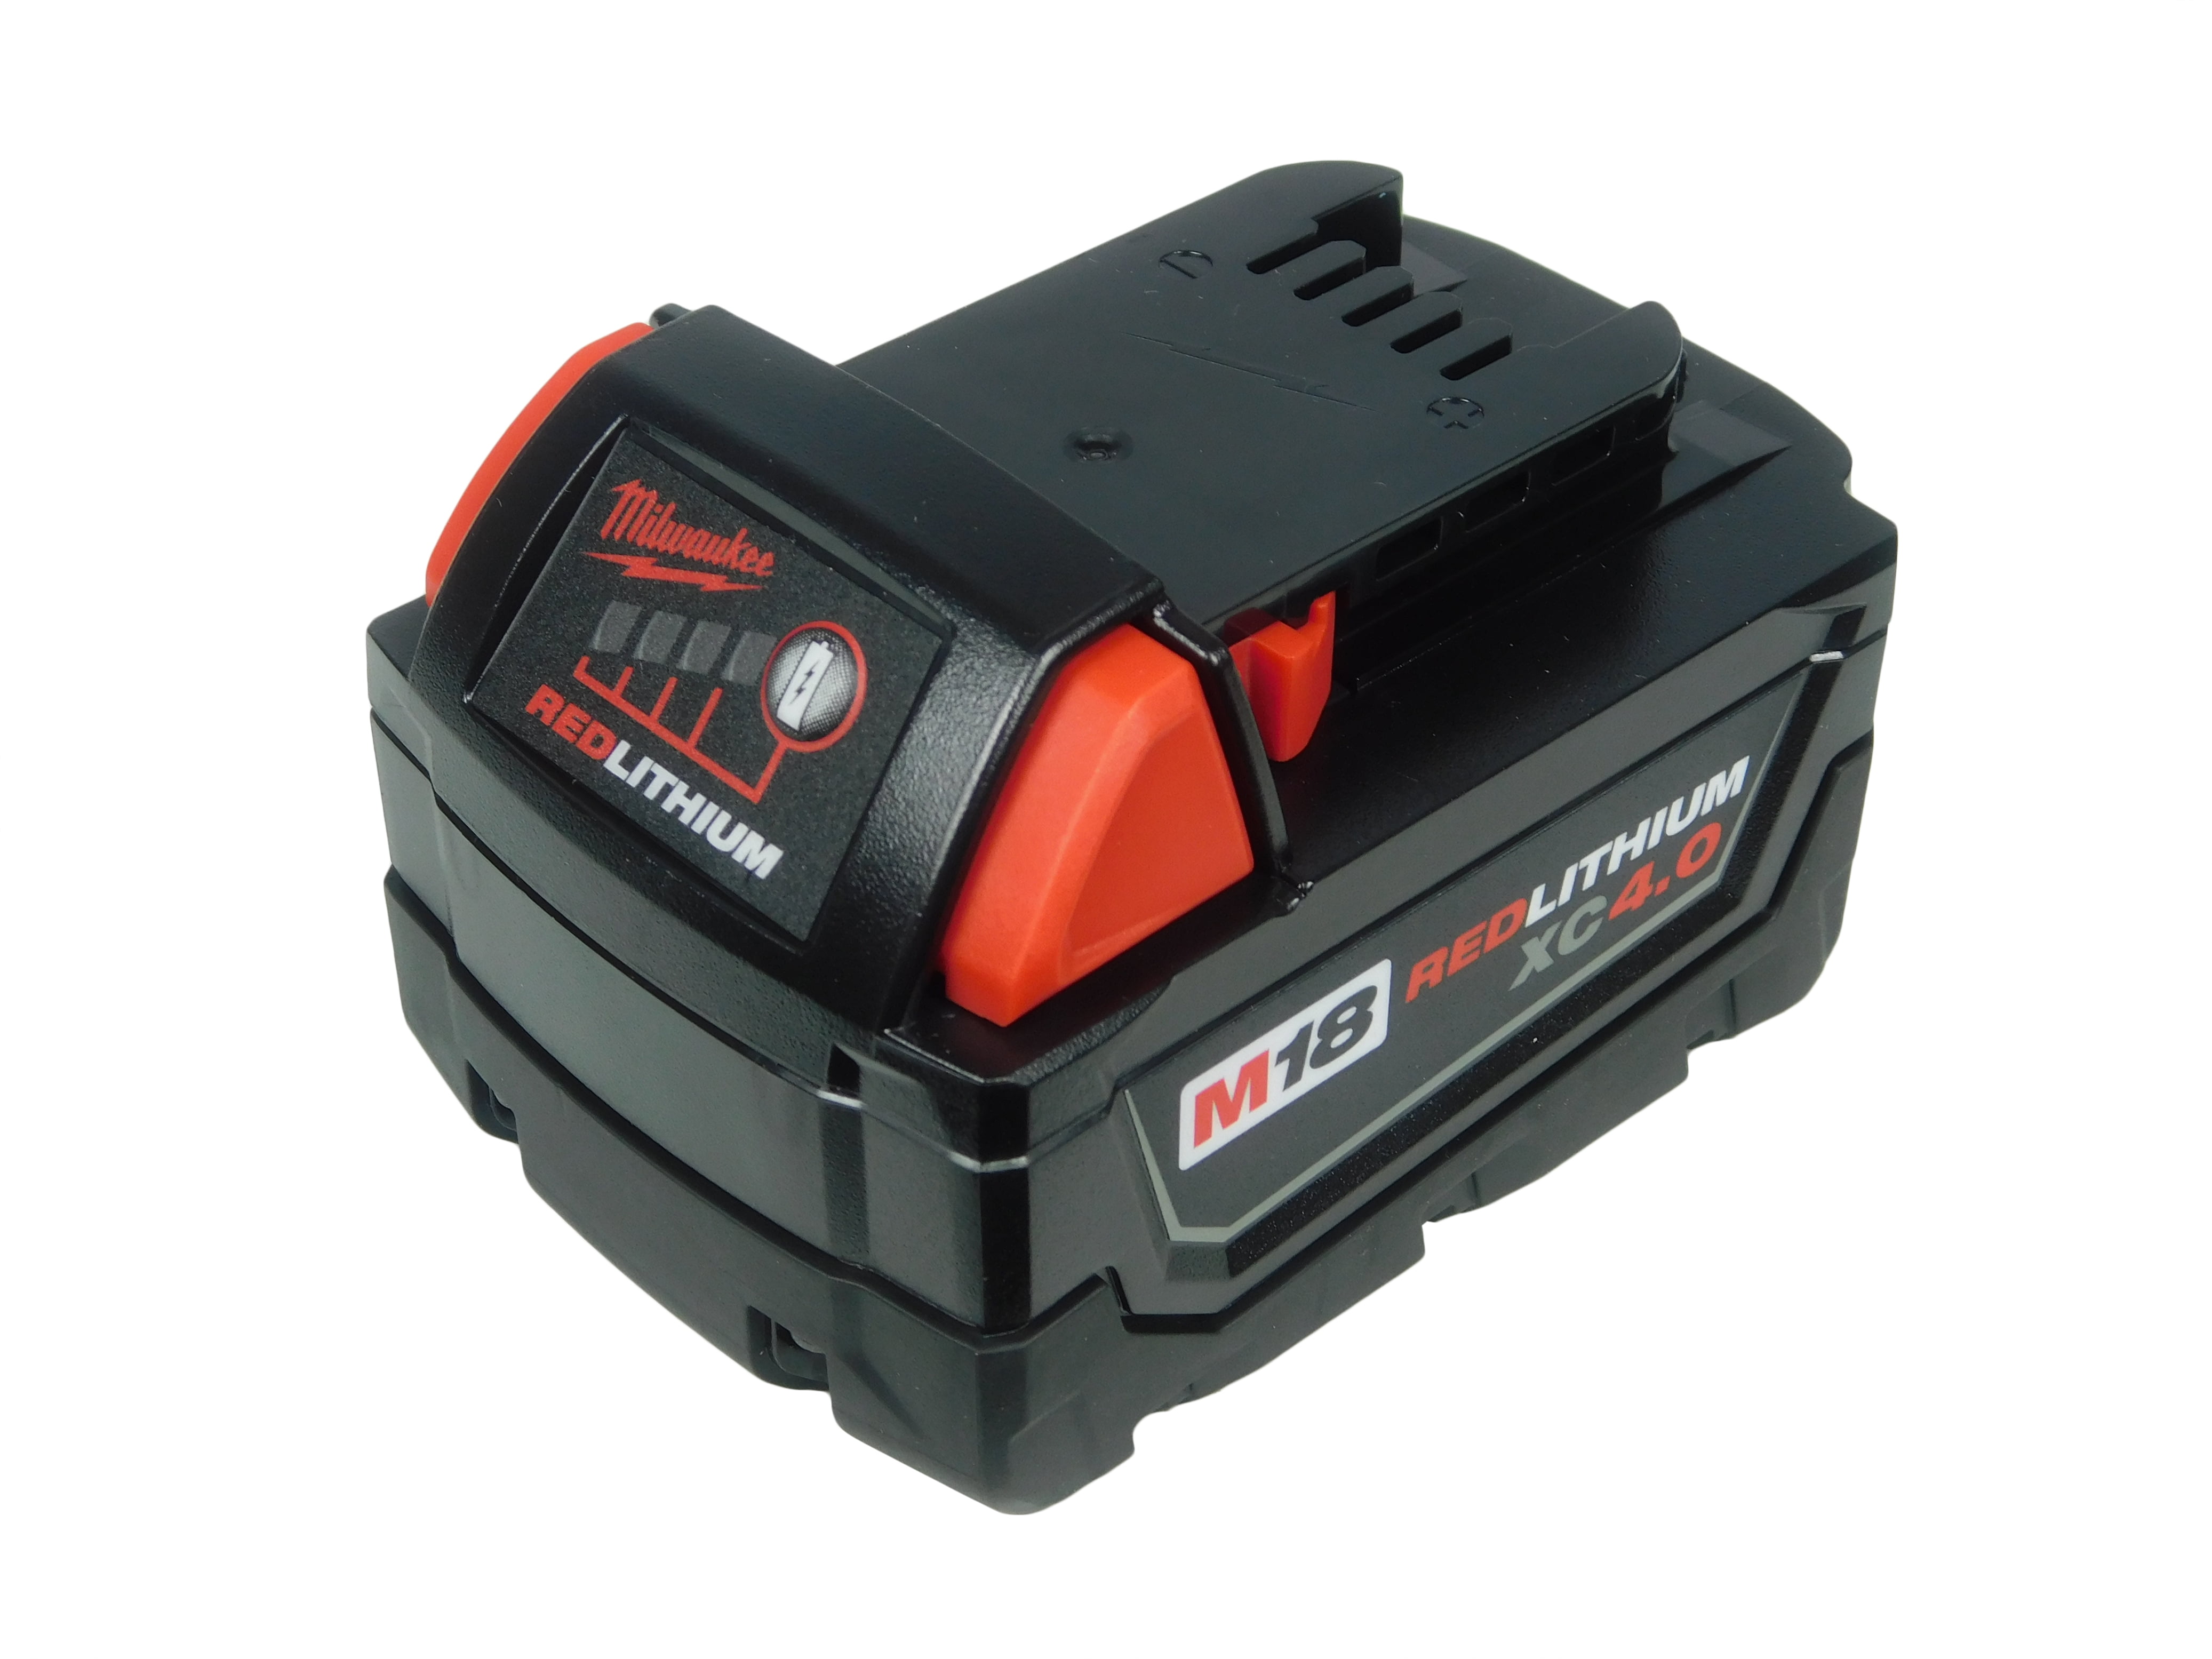 Qty 2 For Milwaukee M18 Fuel 2796-82 Lithium XC 6.0 AH Battery 48-11-1860 1850